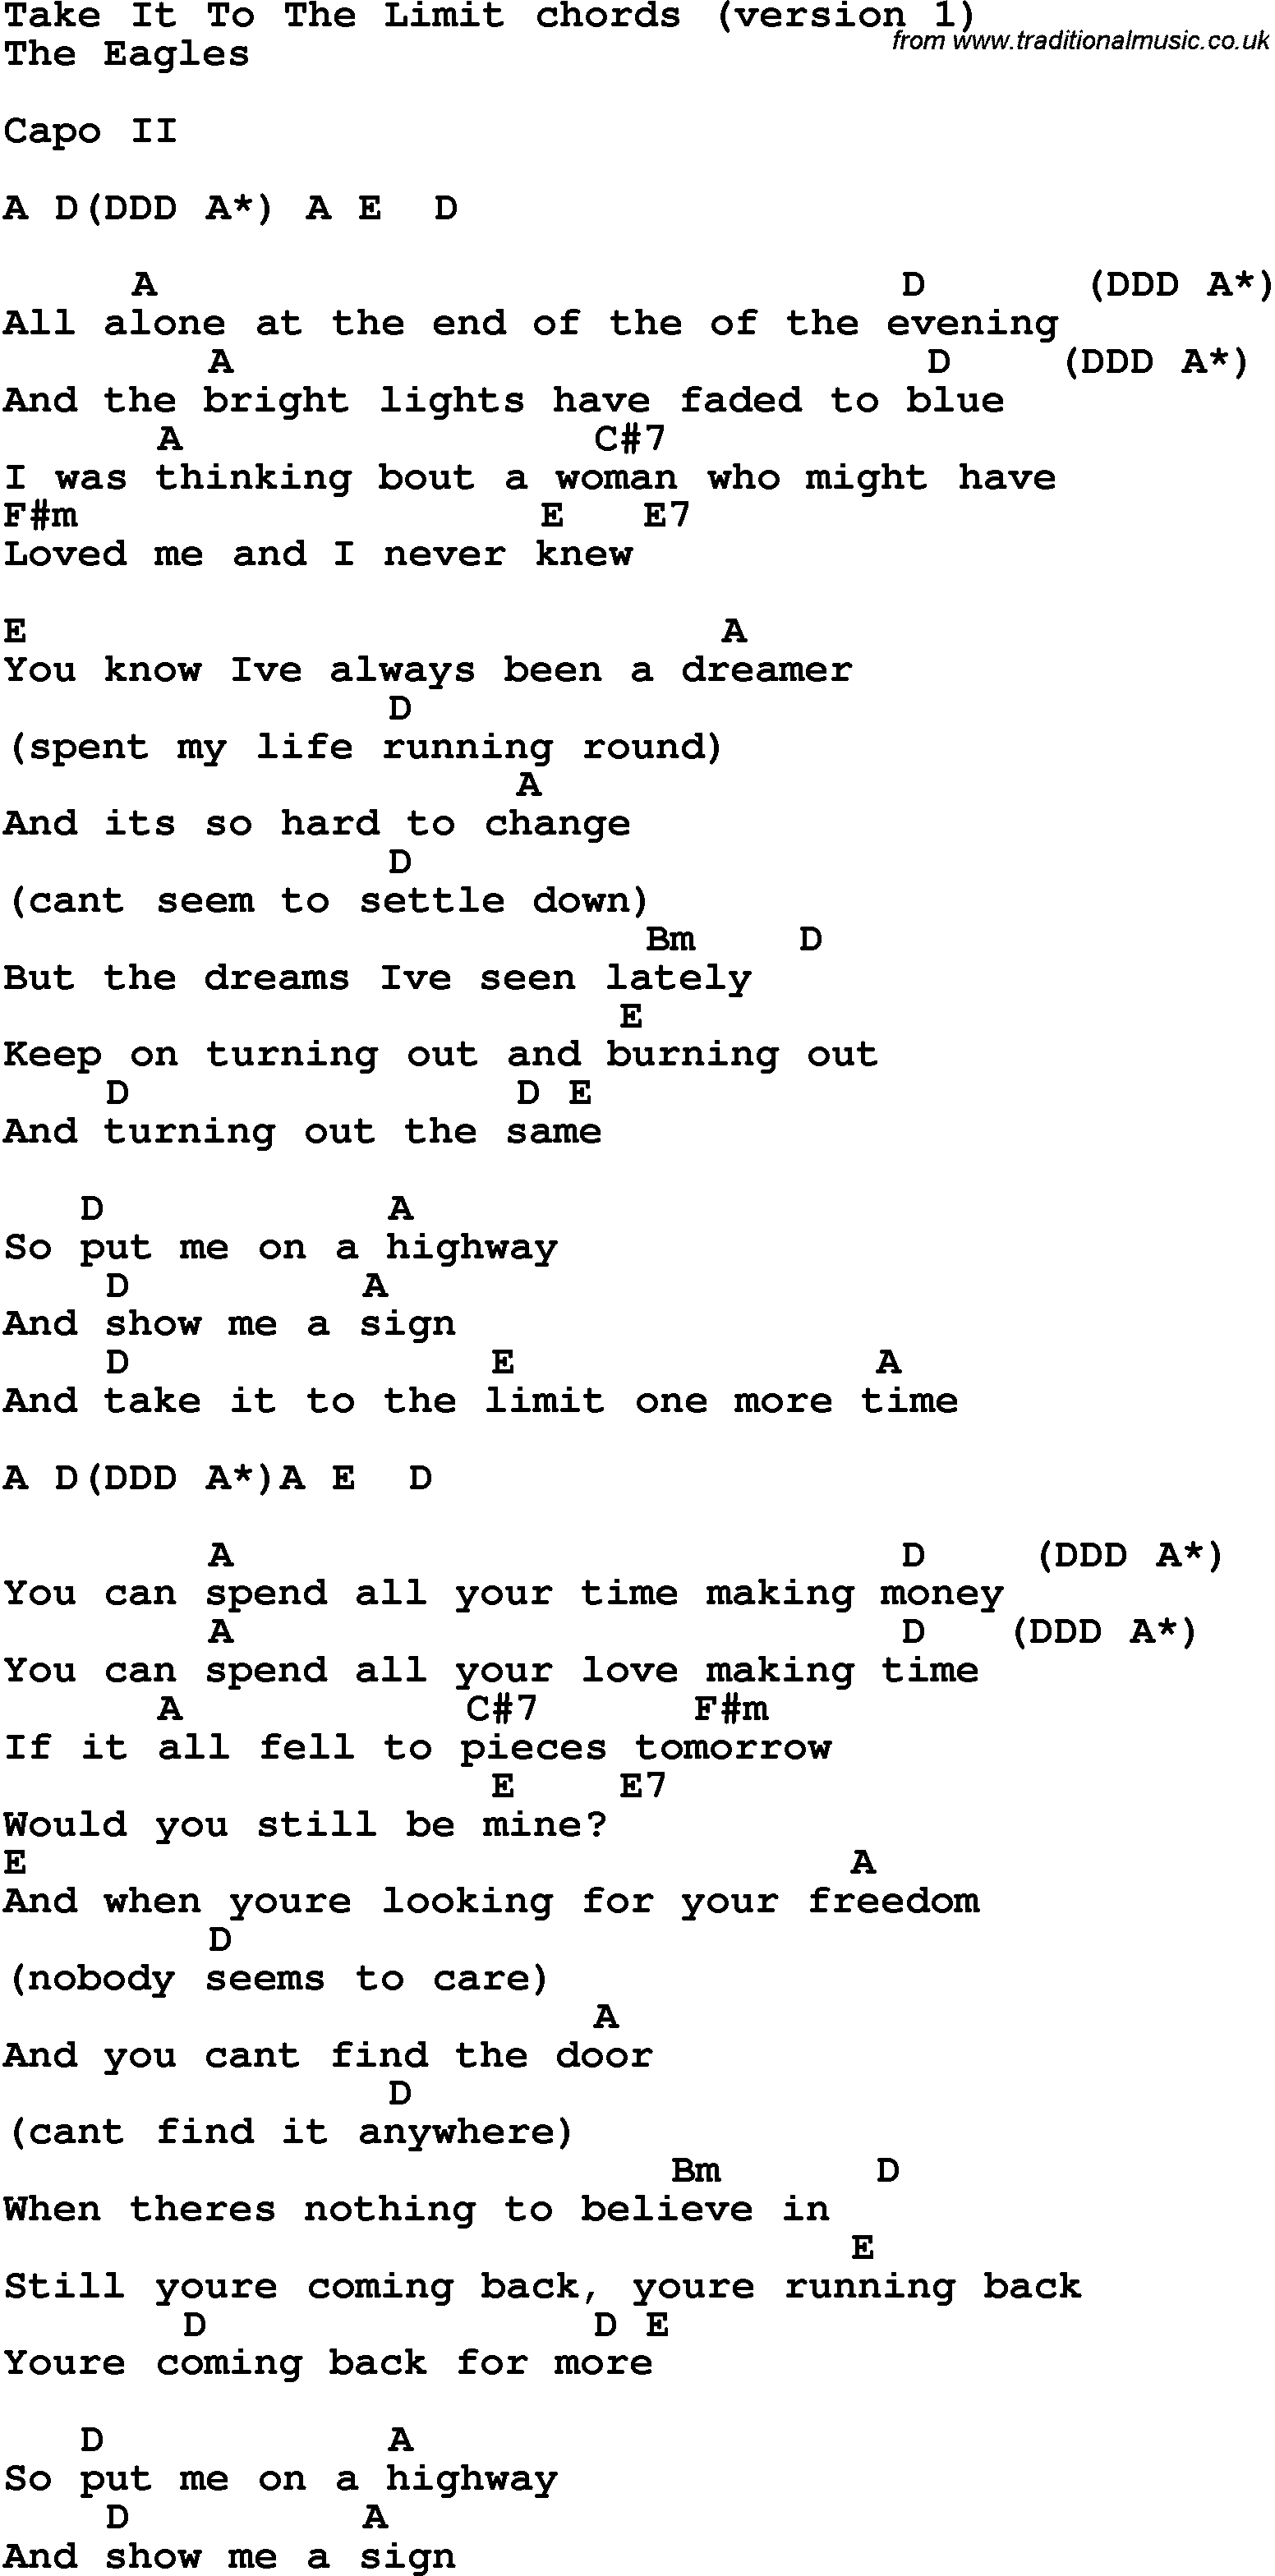 Song Lyrics with guitar chords for Take It To The Limit